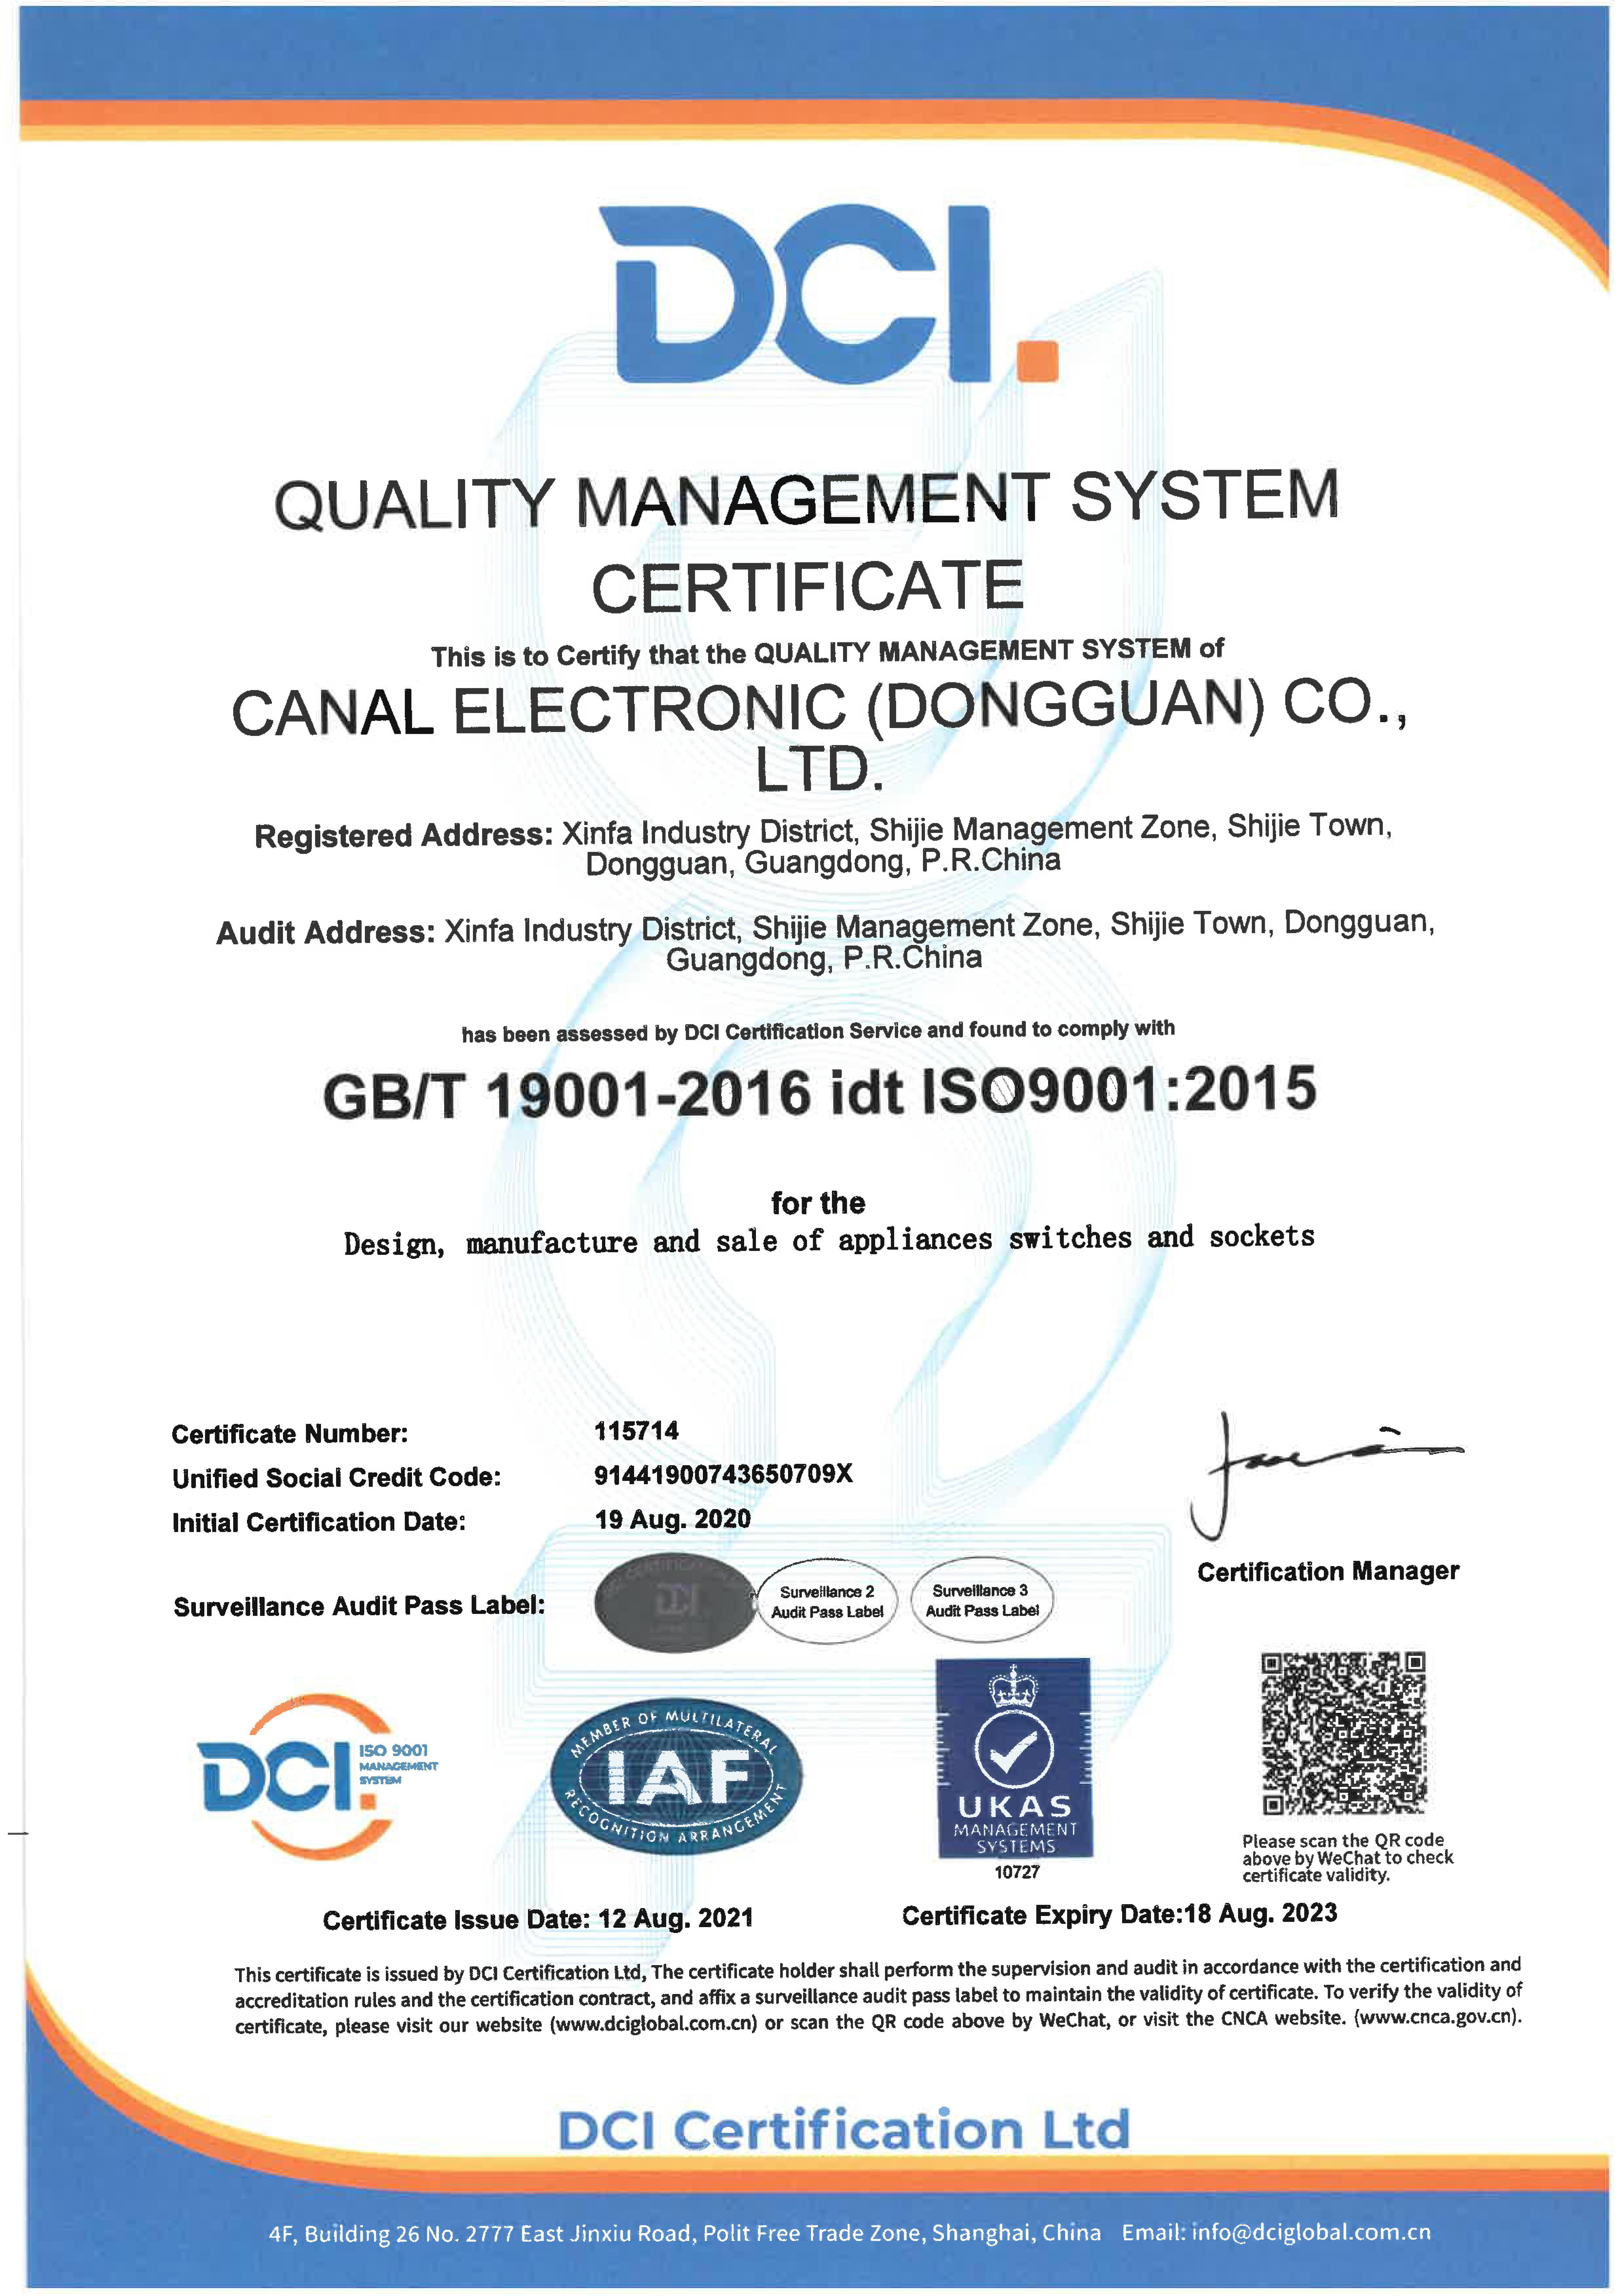 Company Overview of Taiwan Pushbutton Switches Manufacturer Canal